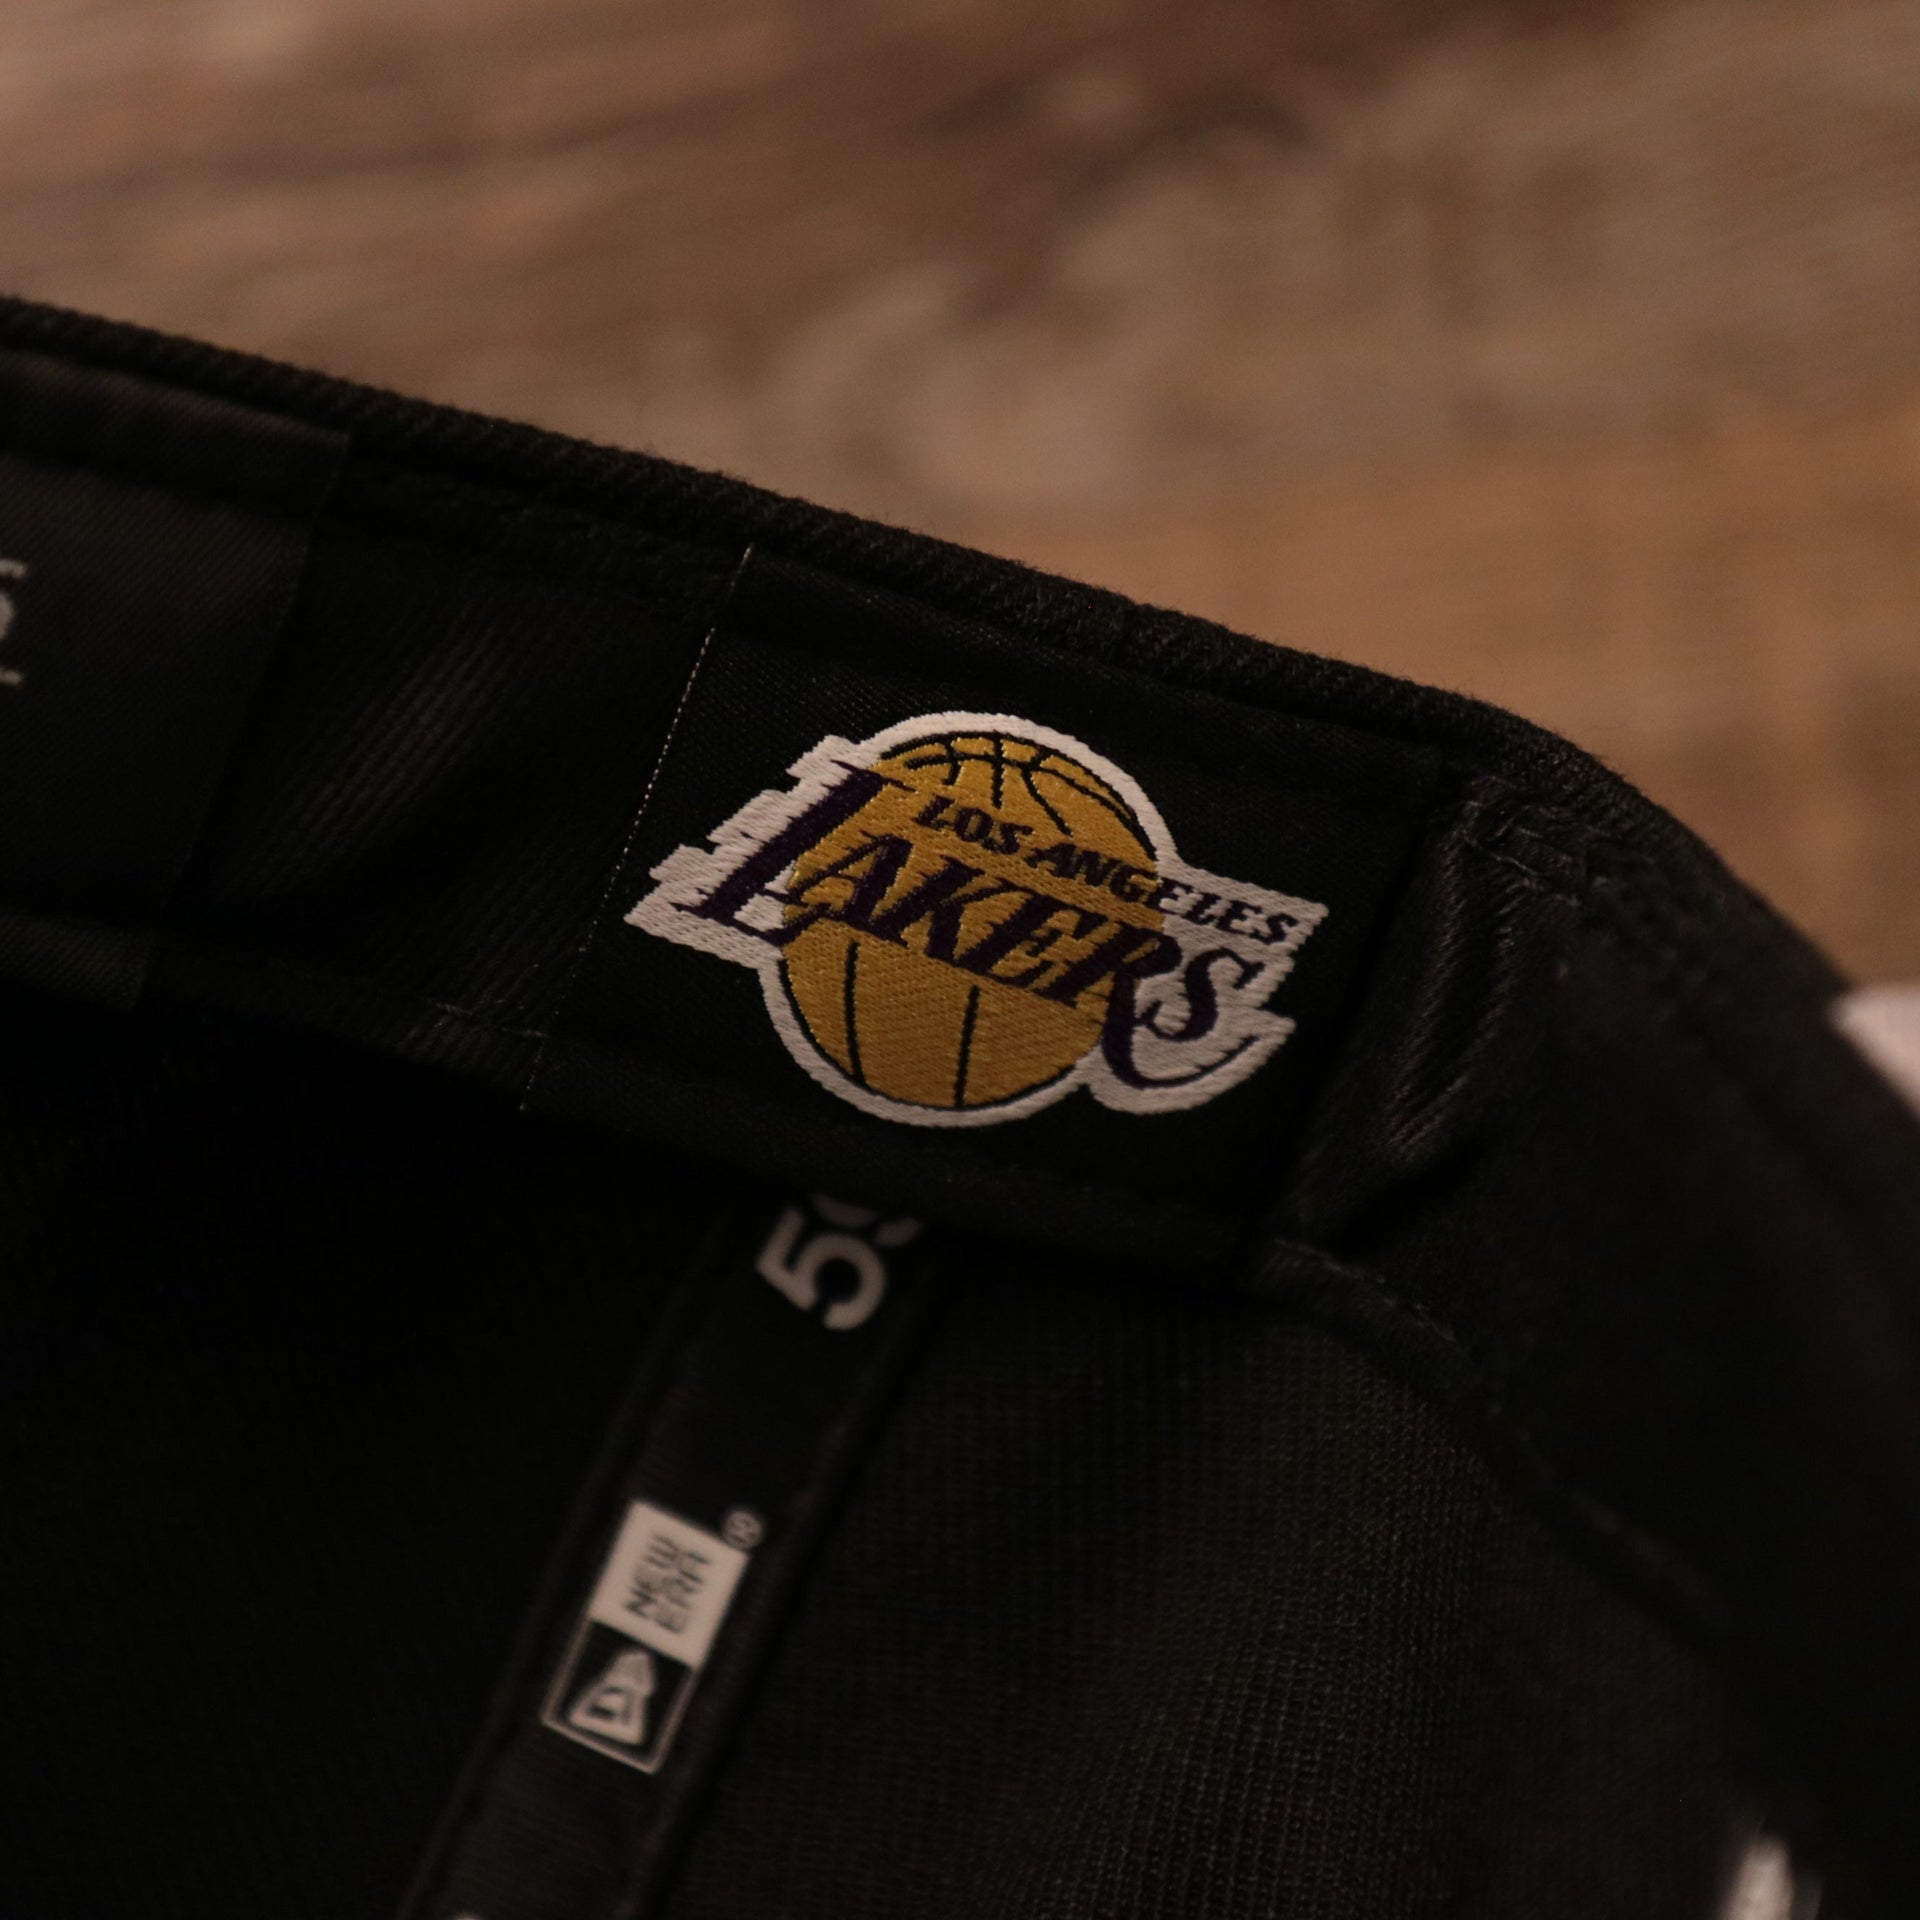 The Los Angeles strap on the inside of the gray bottom brim of the black 17x Lakers champs hat by New Era.